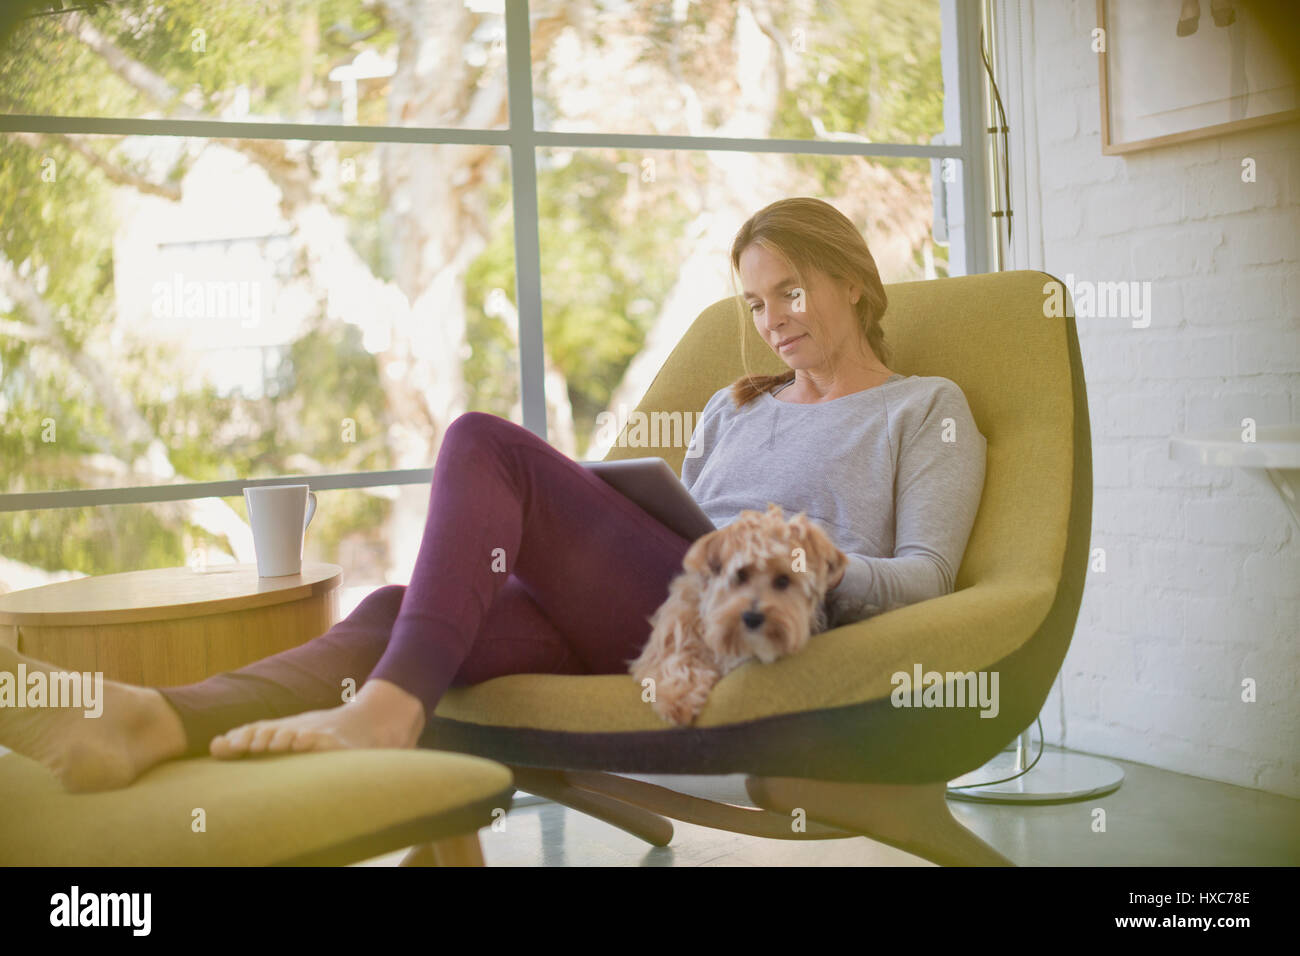 Woman with dog relaxing, using digital tablet in chair Stock Photo